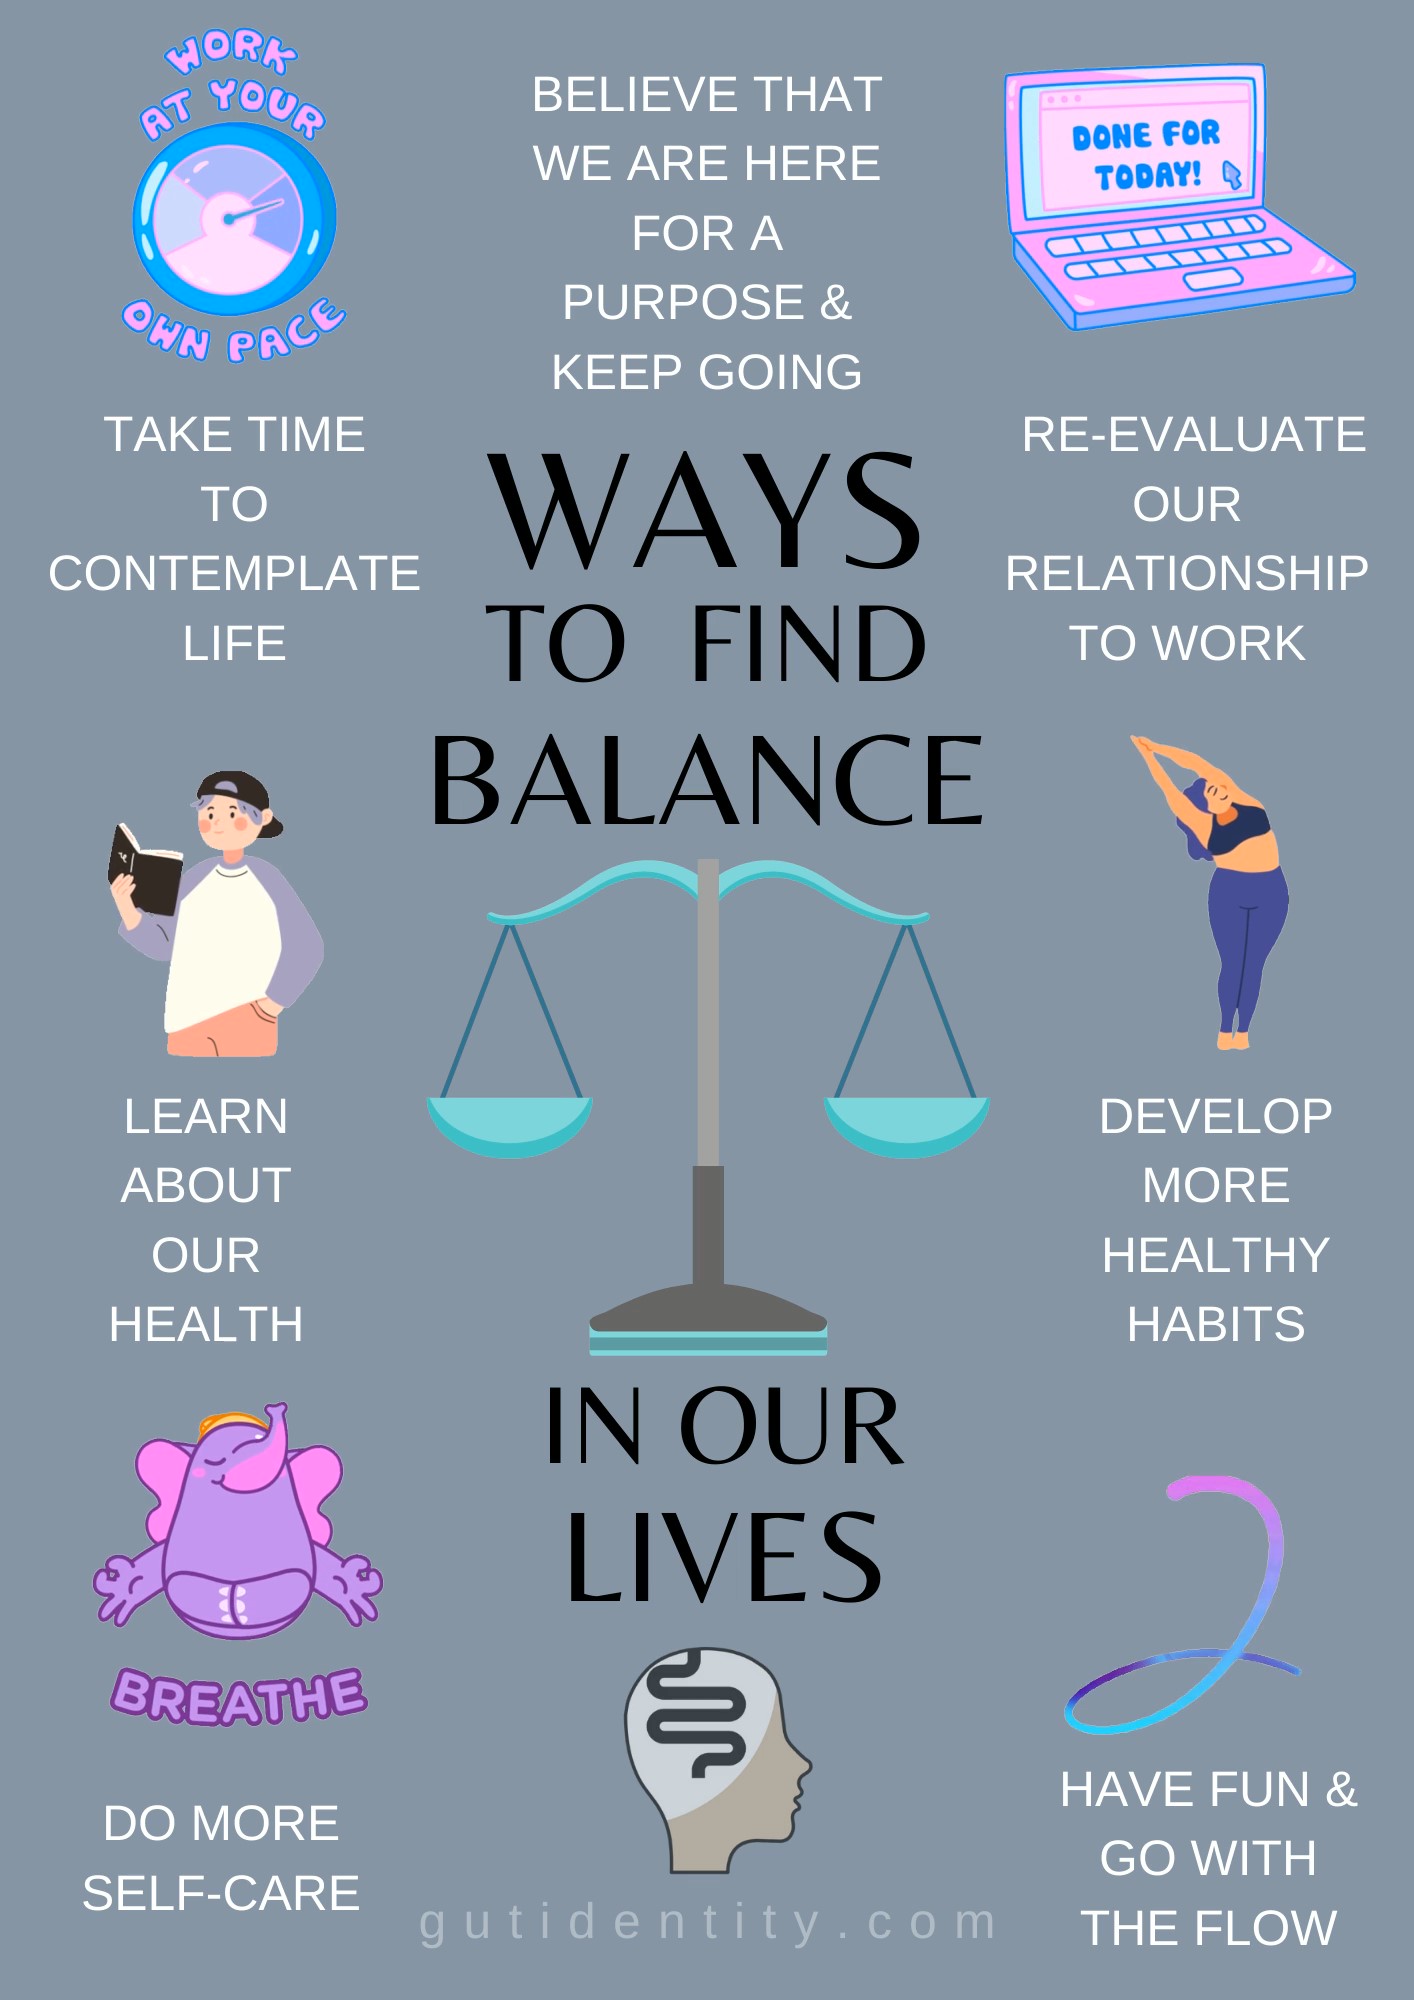 Choose to Find Balance in Our Lives by Gutidentity